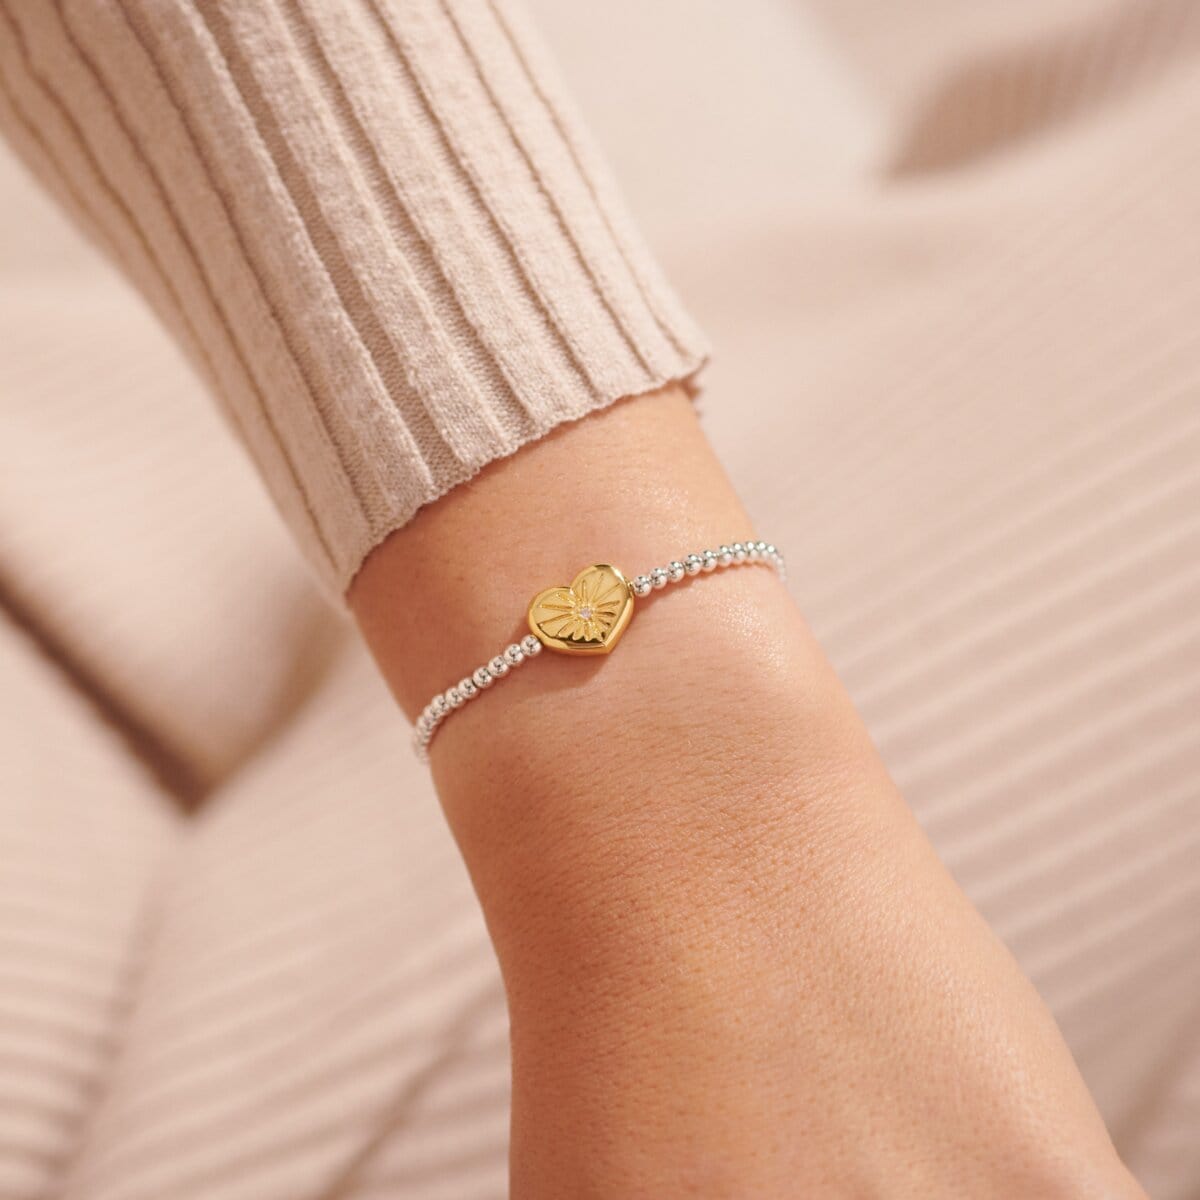 Joma Jewellery Bracelet Joma Jewellery Bracelet - A Little Unstoppable